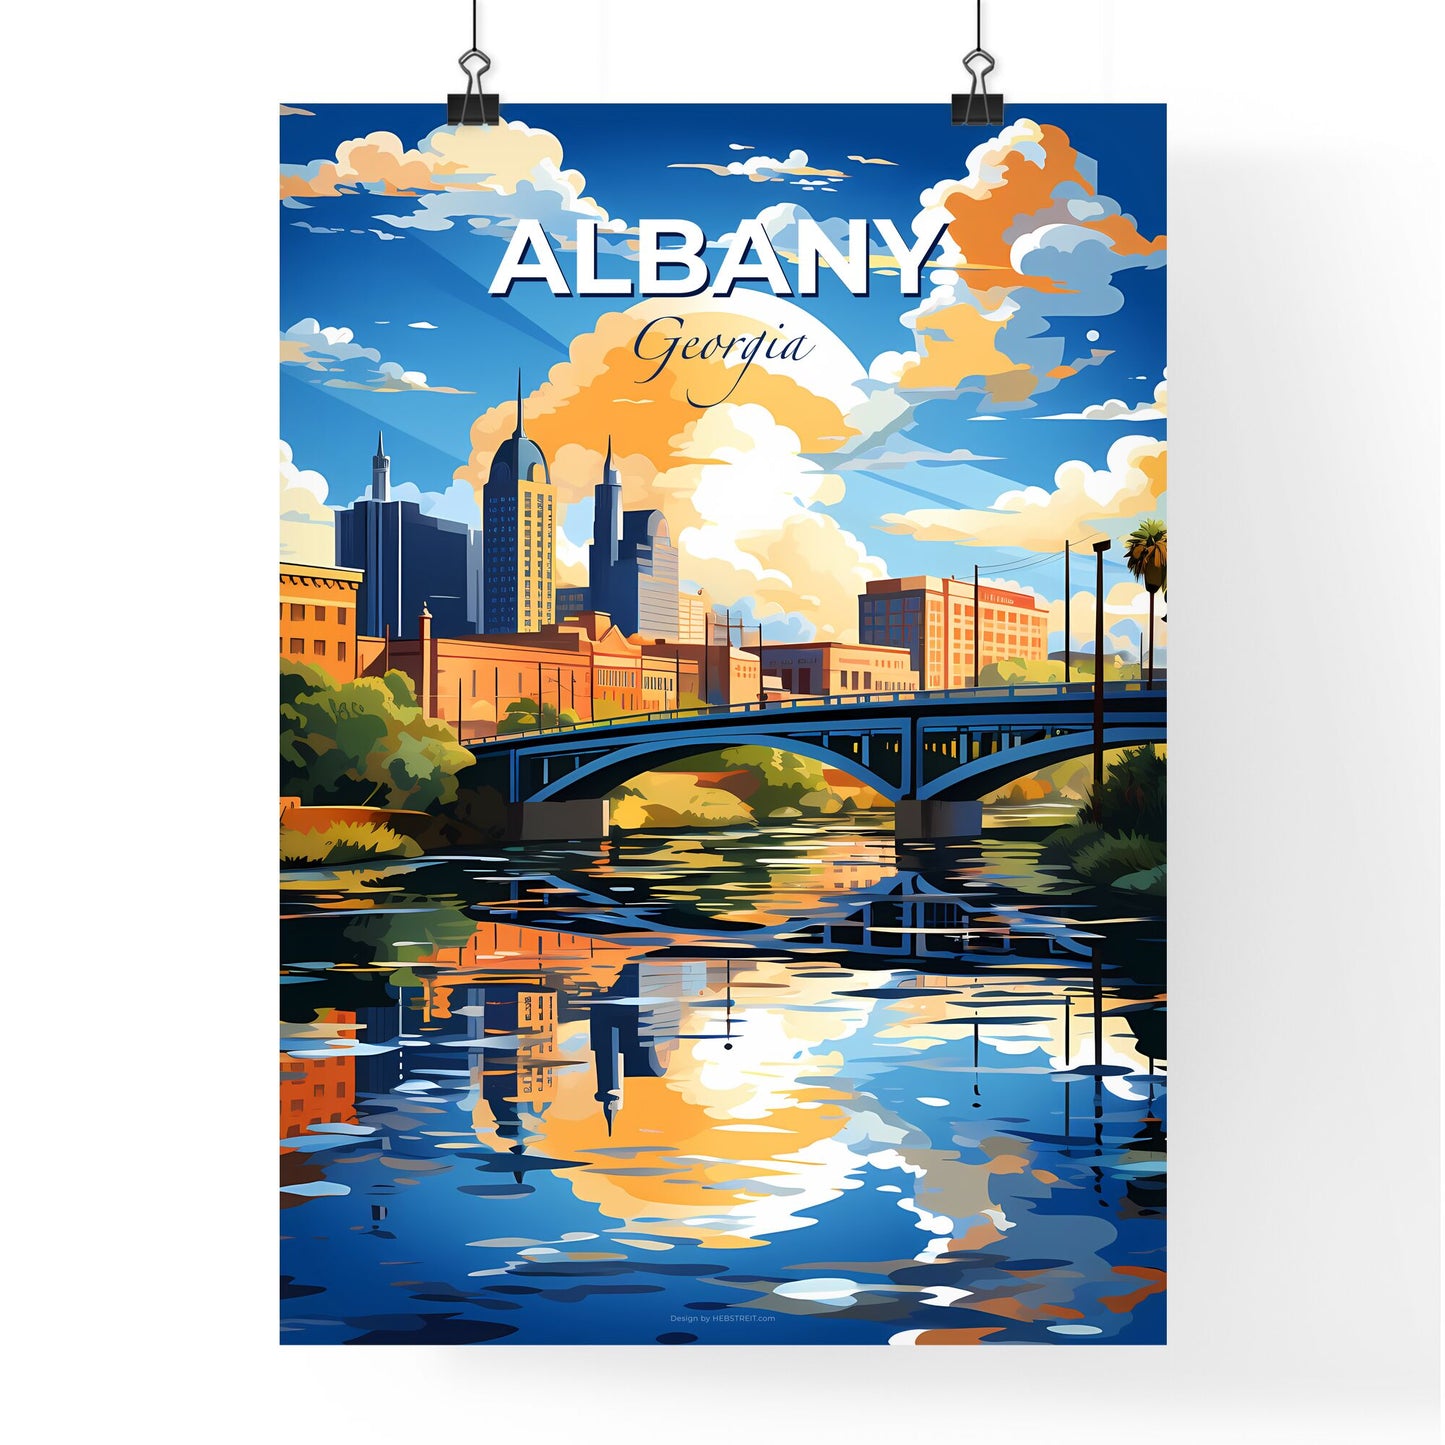 Albany, Georgia, A Poster of a bridge over a river with buildings and trees Default Title